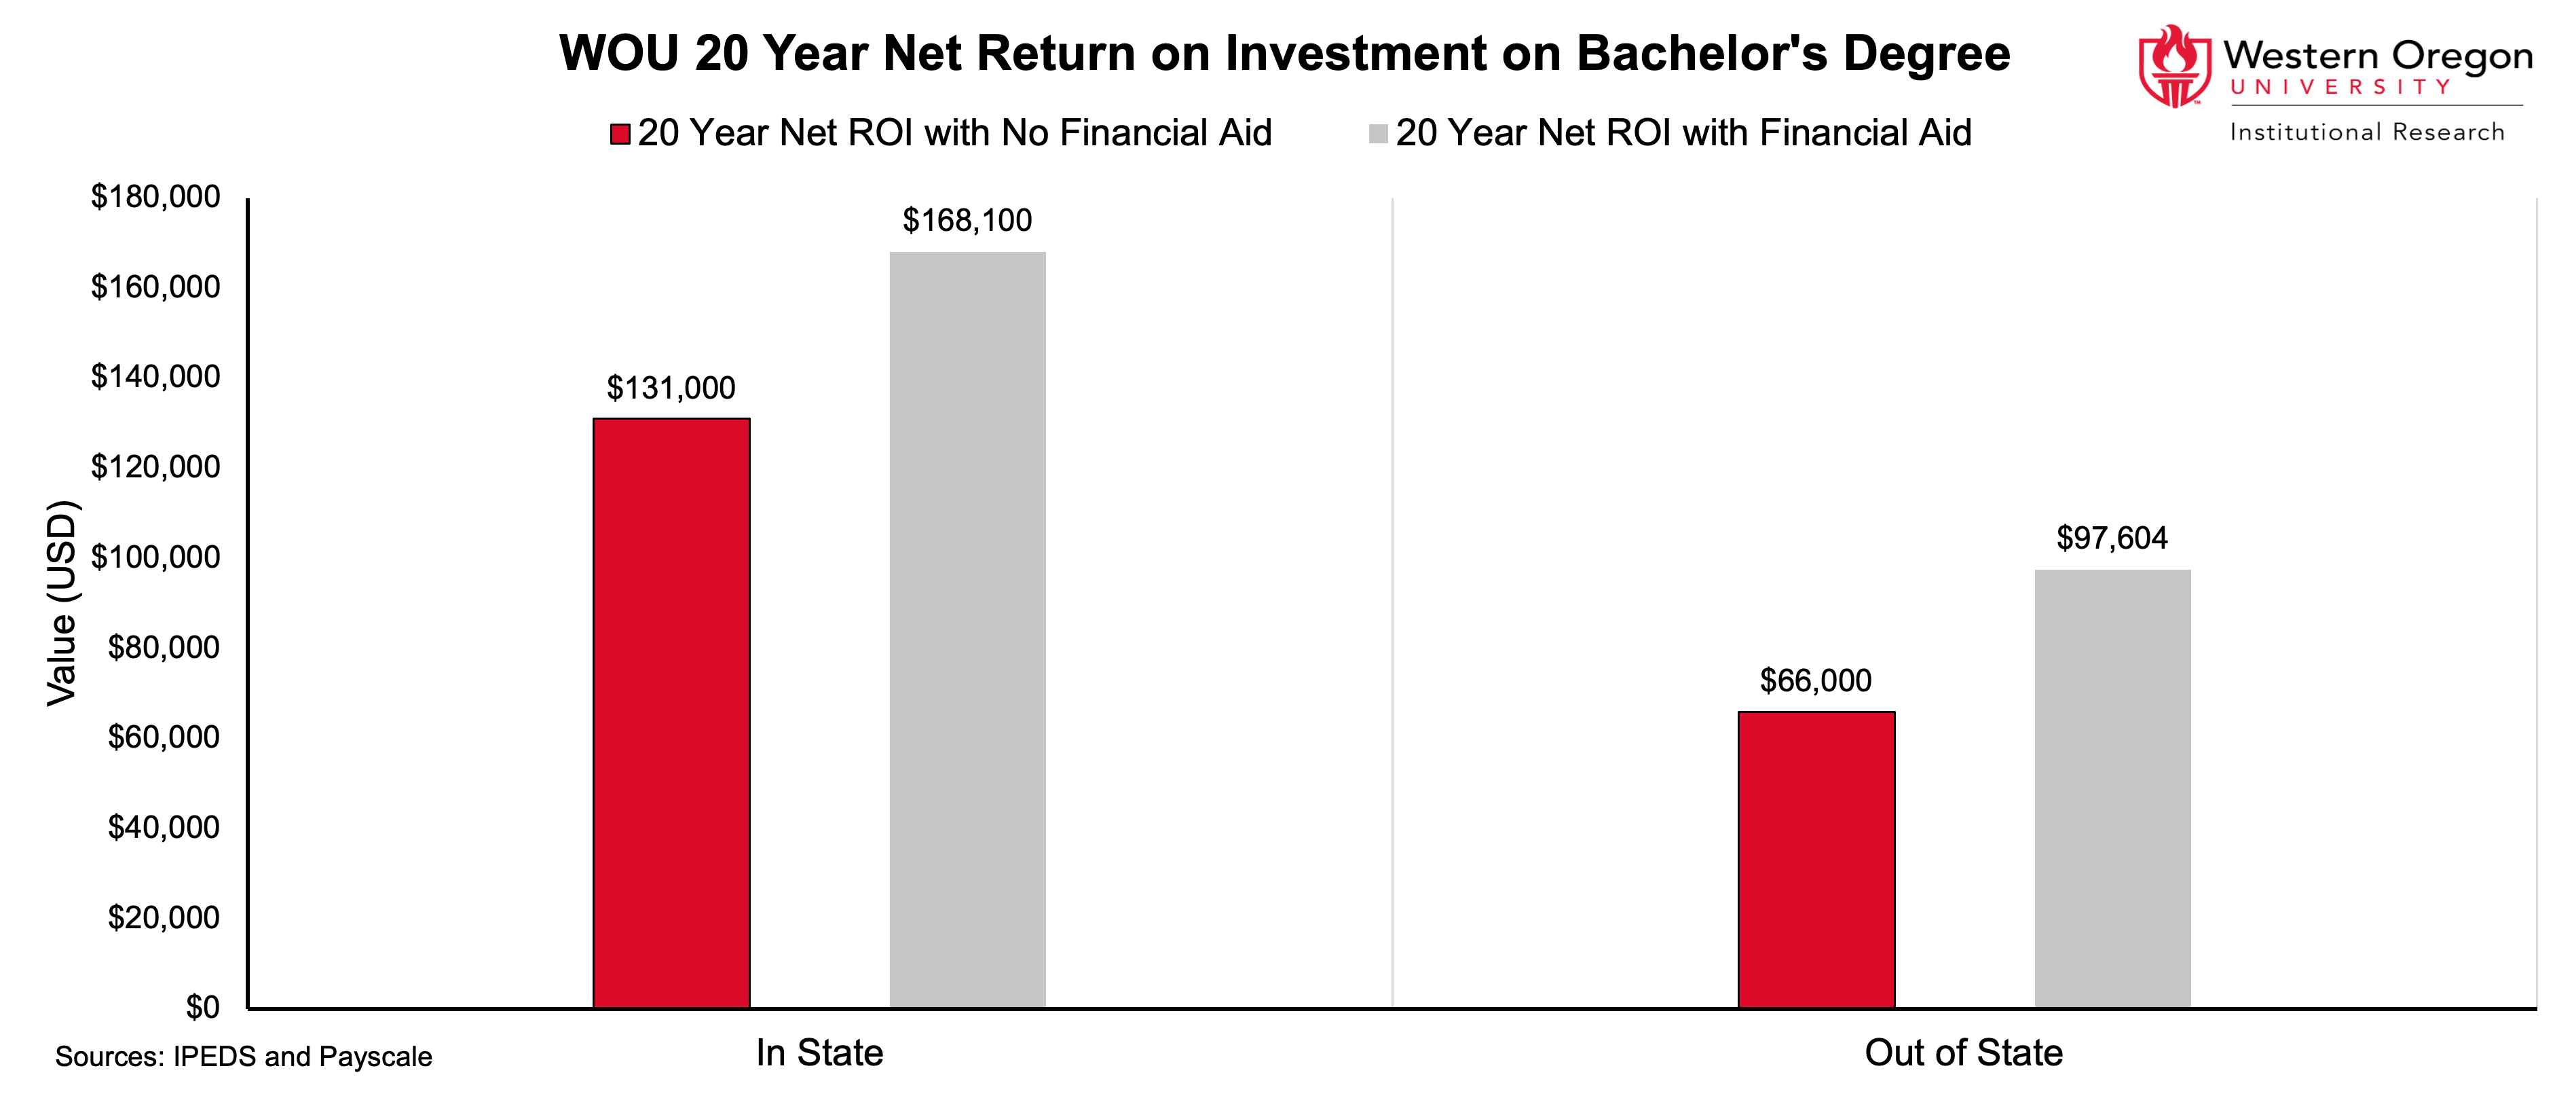 Bar graph of 20-year net return on investment on Bachelor's degree for in-state and out-of-state WOU students, showing that the return on investment is larger if students received financial aid than if they didn't receive financial aid